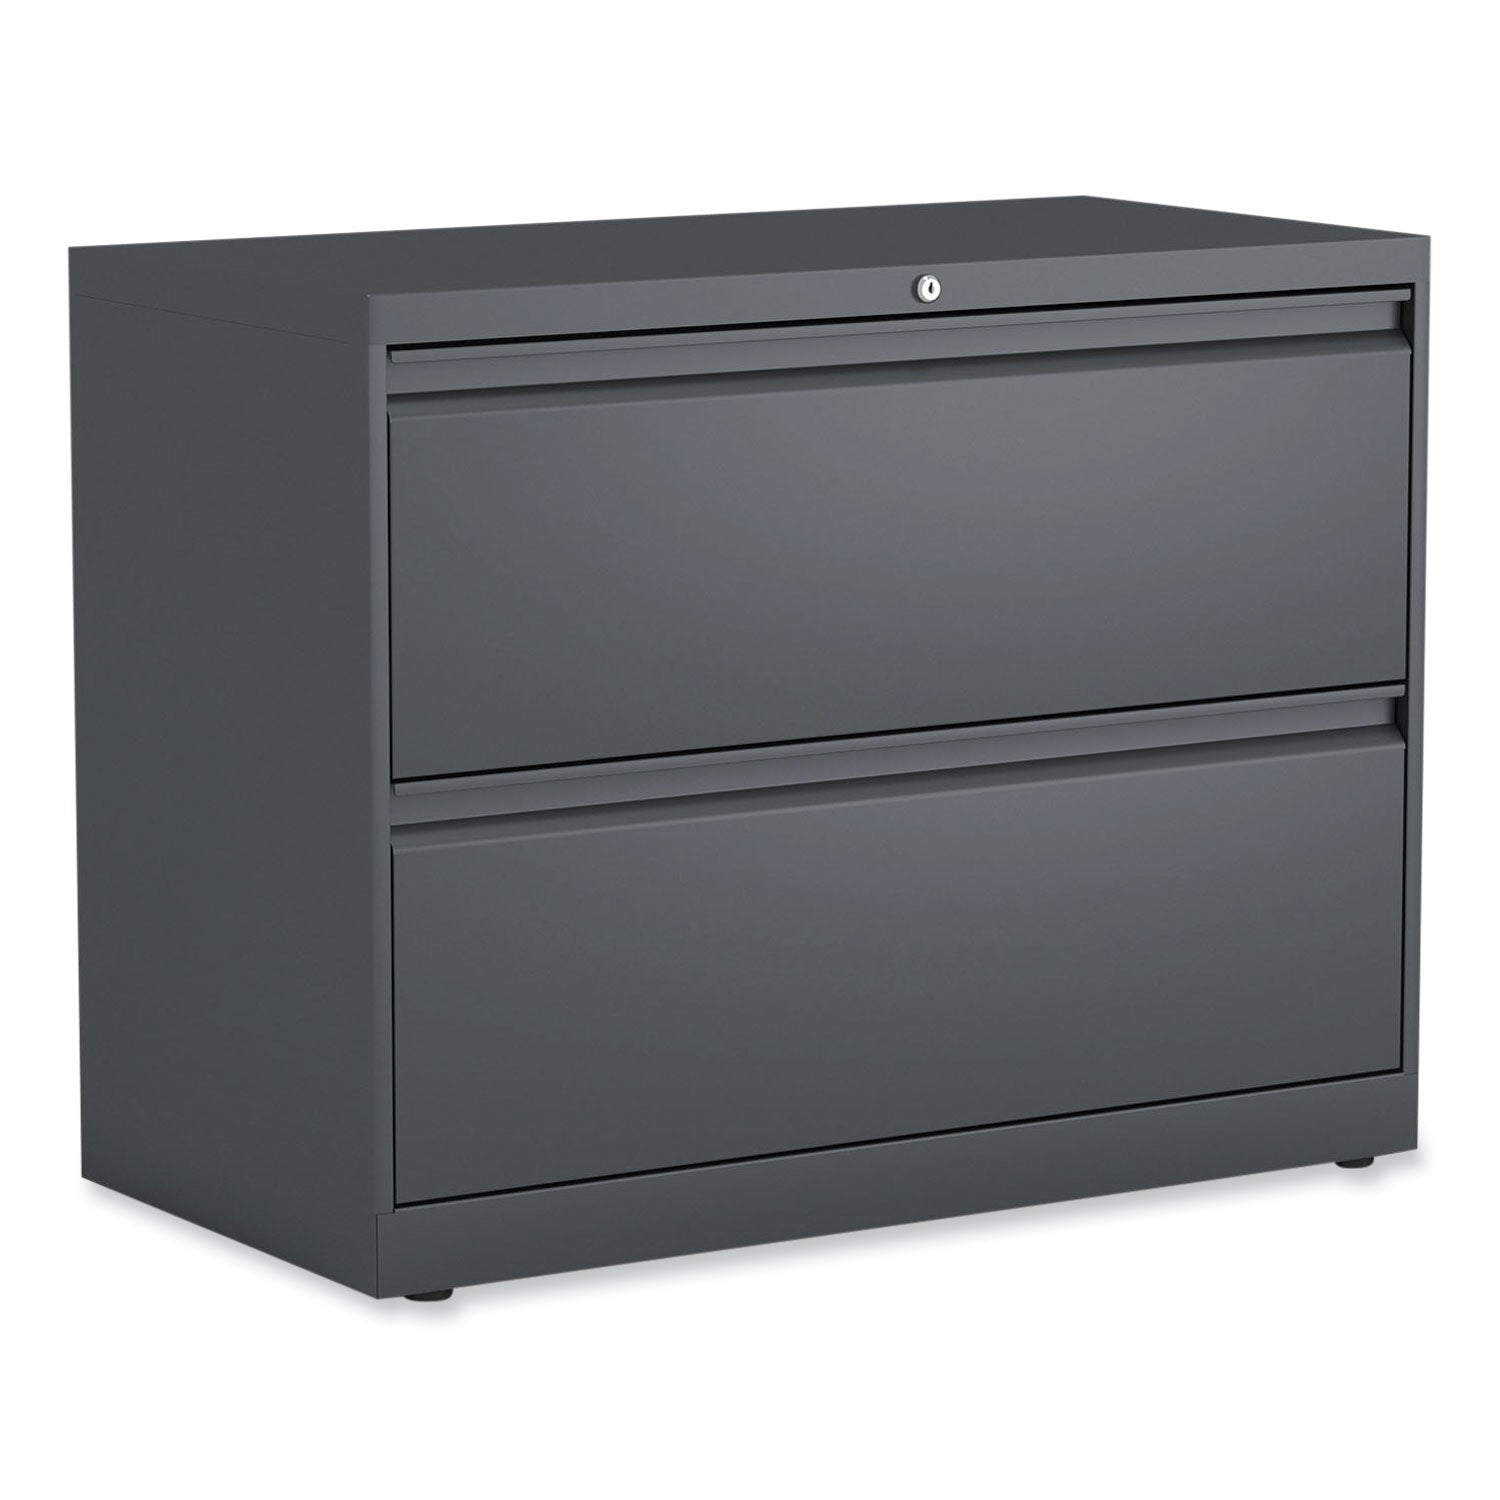 lateral-file-2-legal-letter-a4-a5-size-file-drawers-charcoal-36-x-1863-x-28_alehlf3629cc - 1